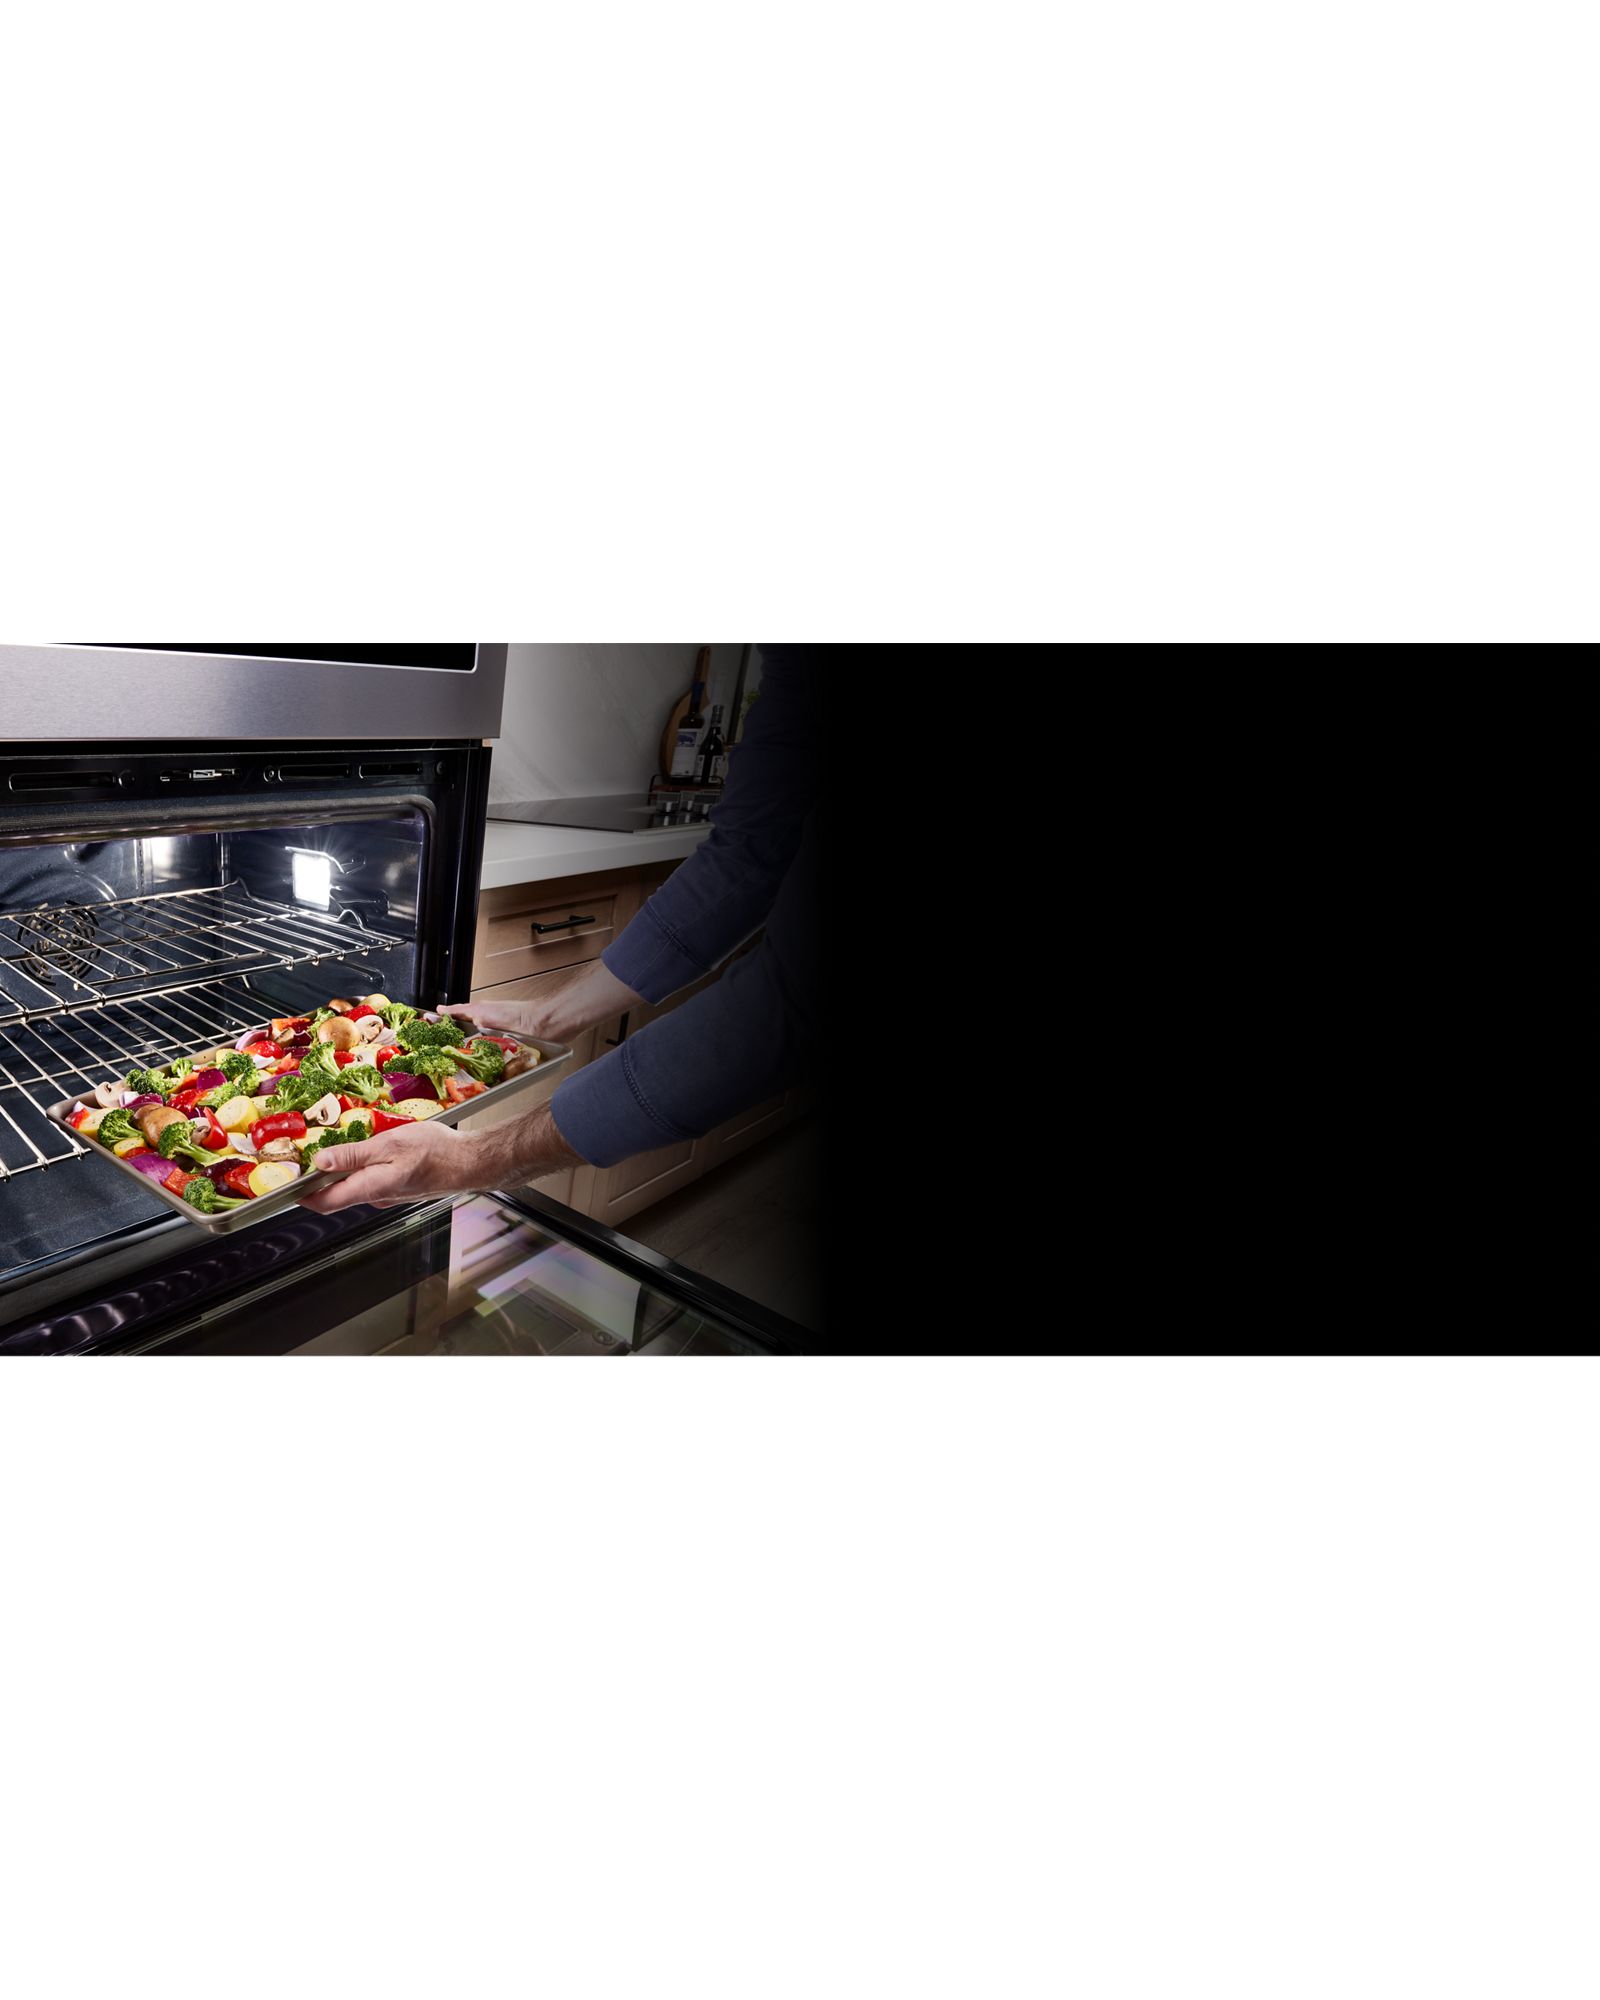 Buy Maytag 30-inch Double Wall Oven with Air Fry and Basket - 10 cu. ft.